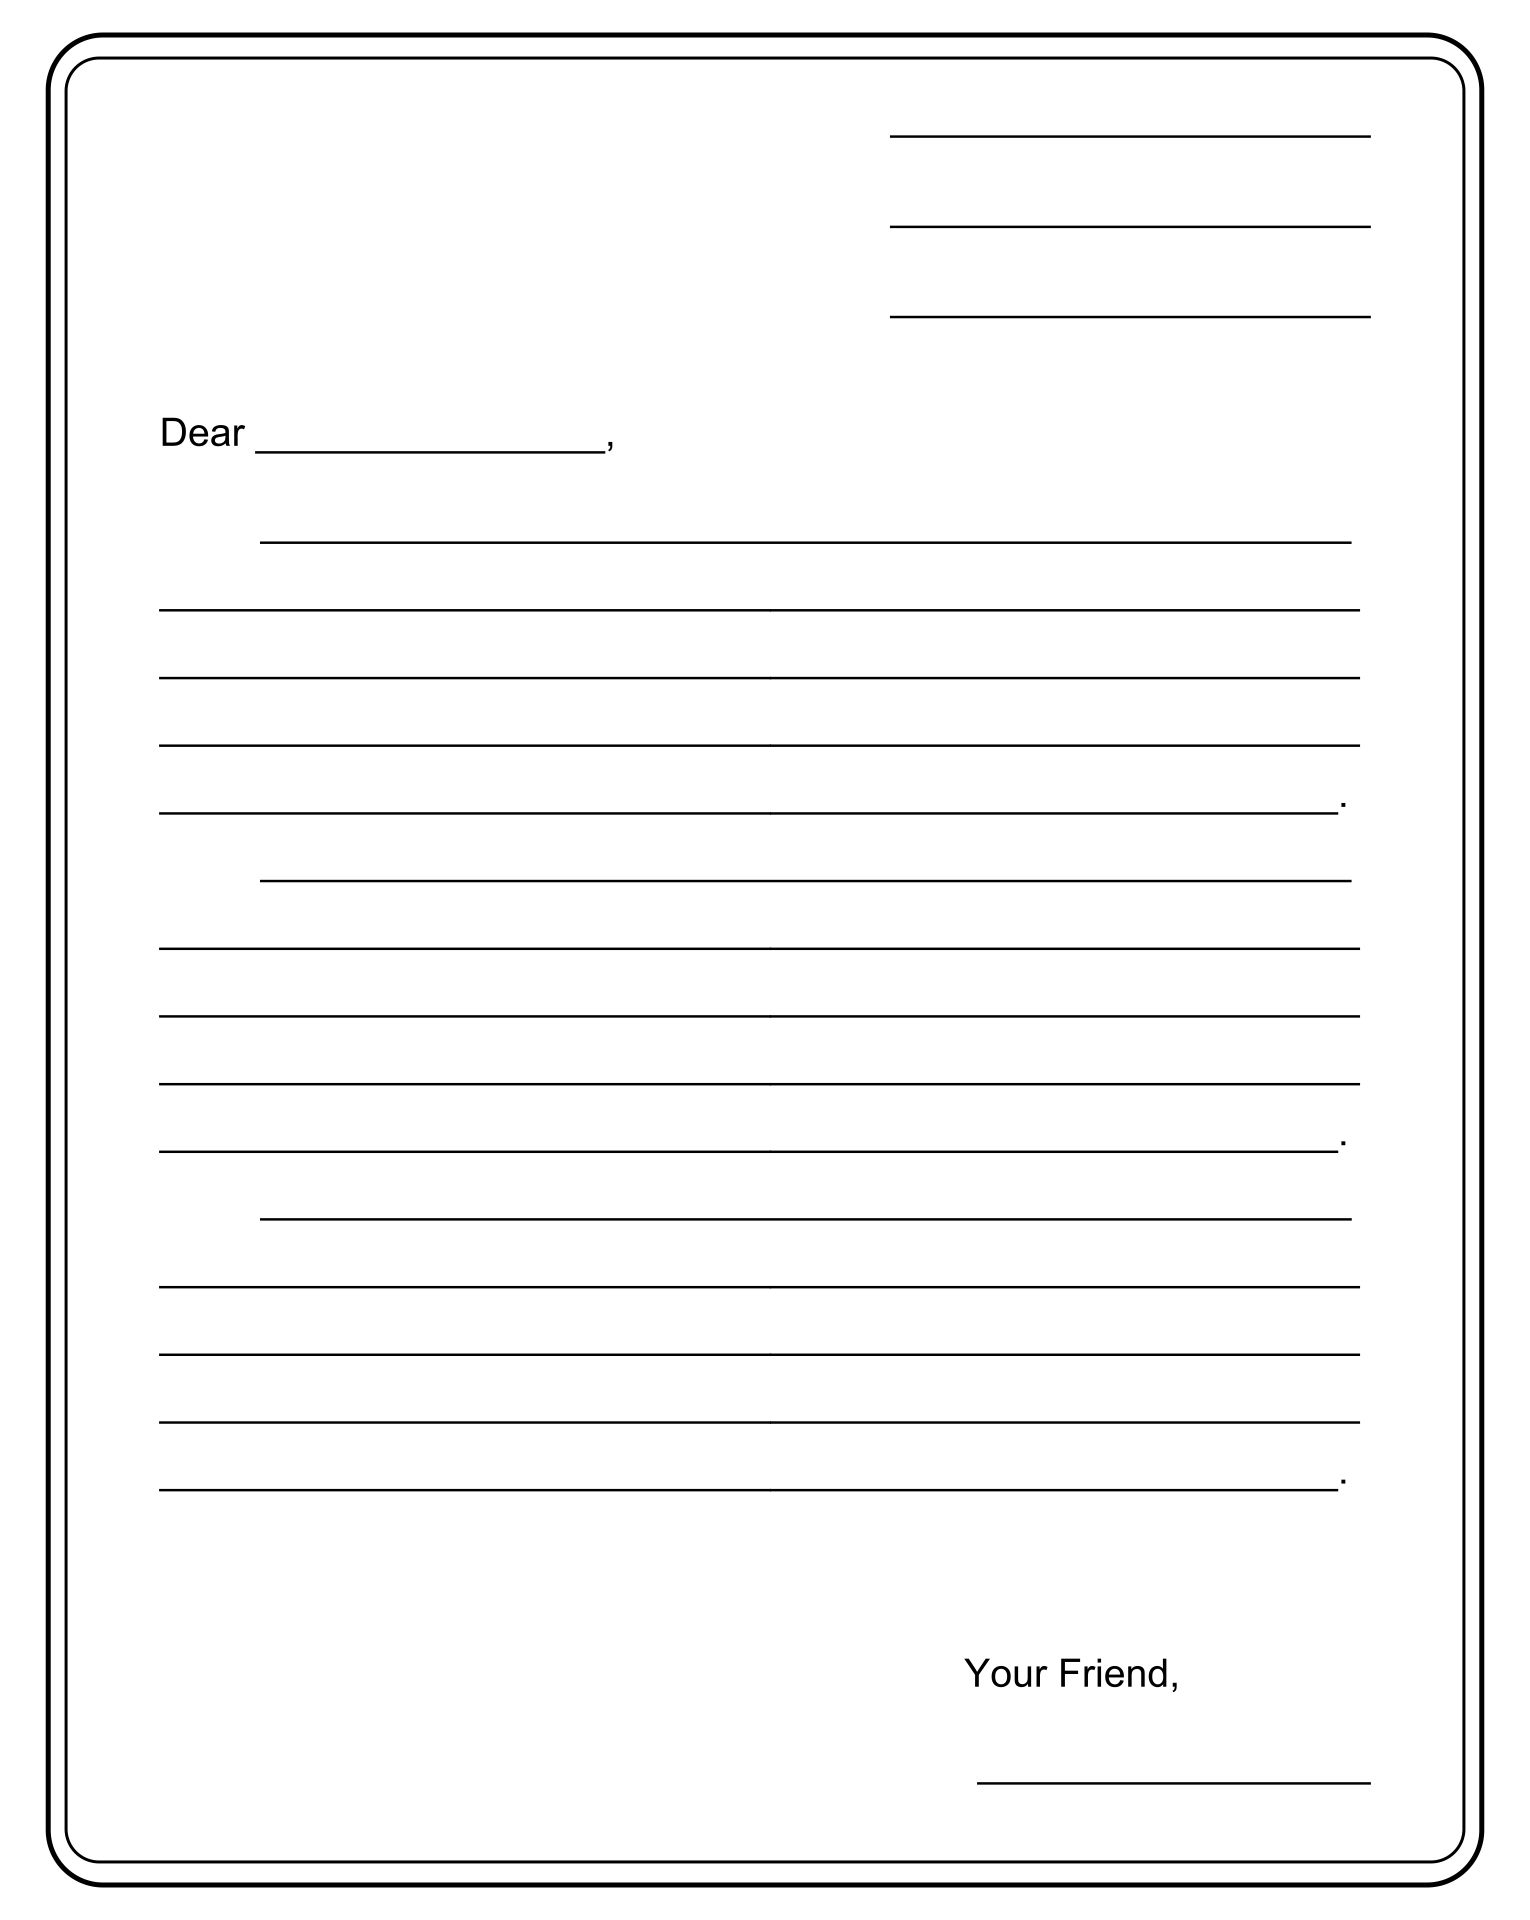 free-printable-friendly-letter-template-printable-templates-bank2home